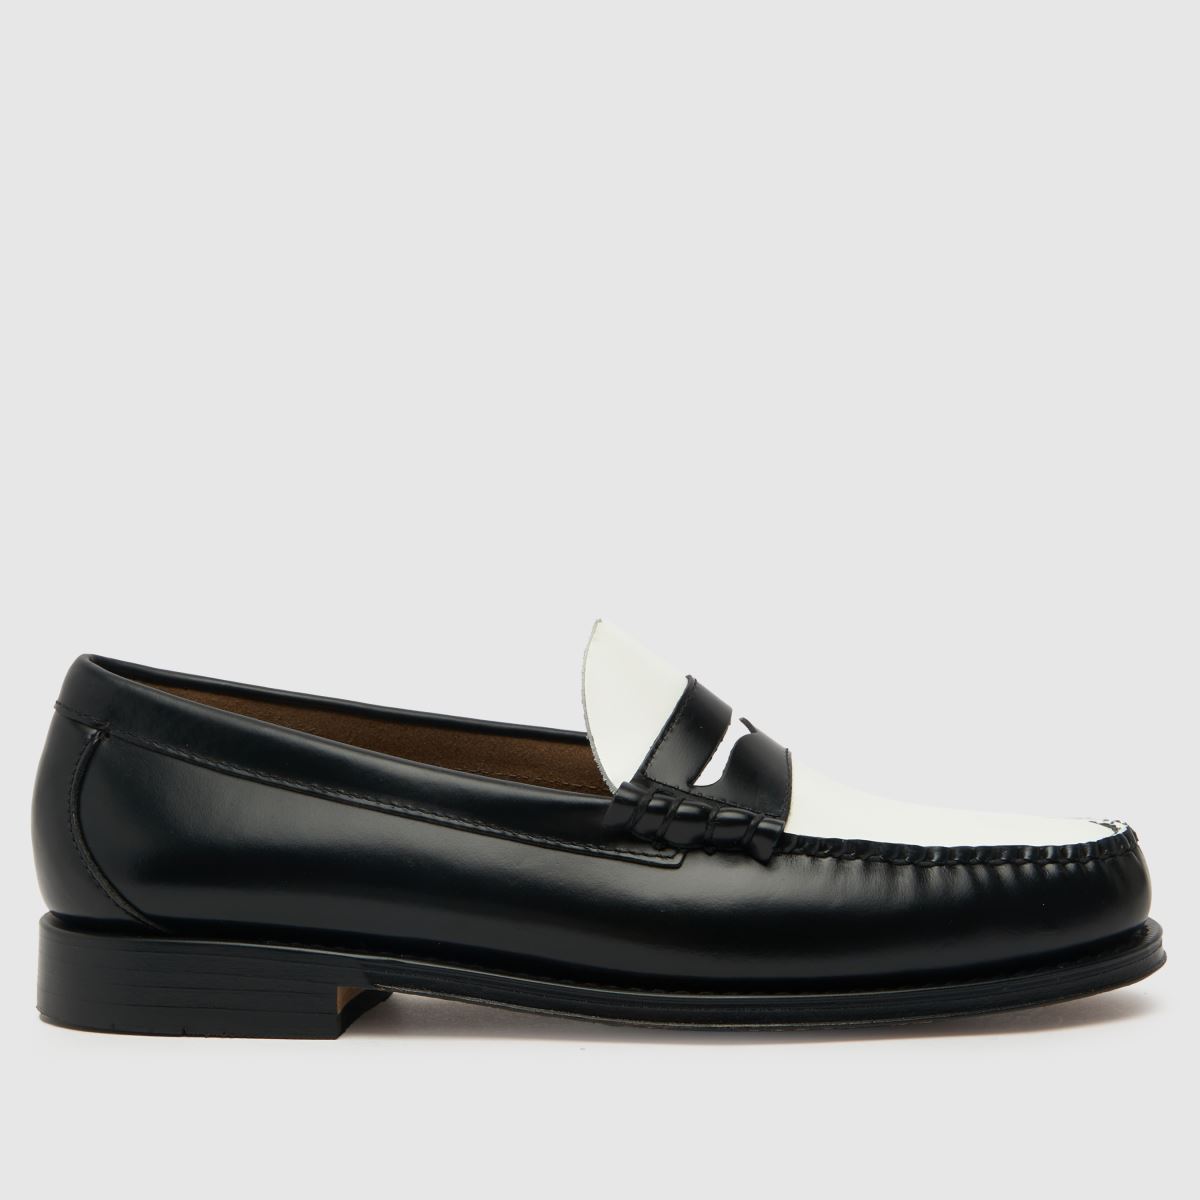 G.H. BASS heritage larson penny loafer shoes in black & white